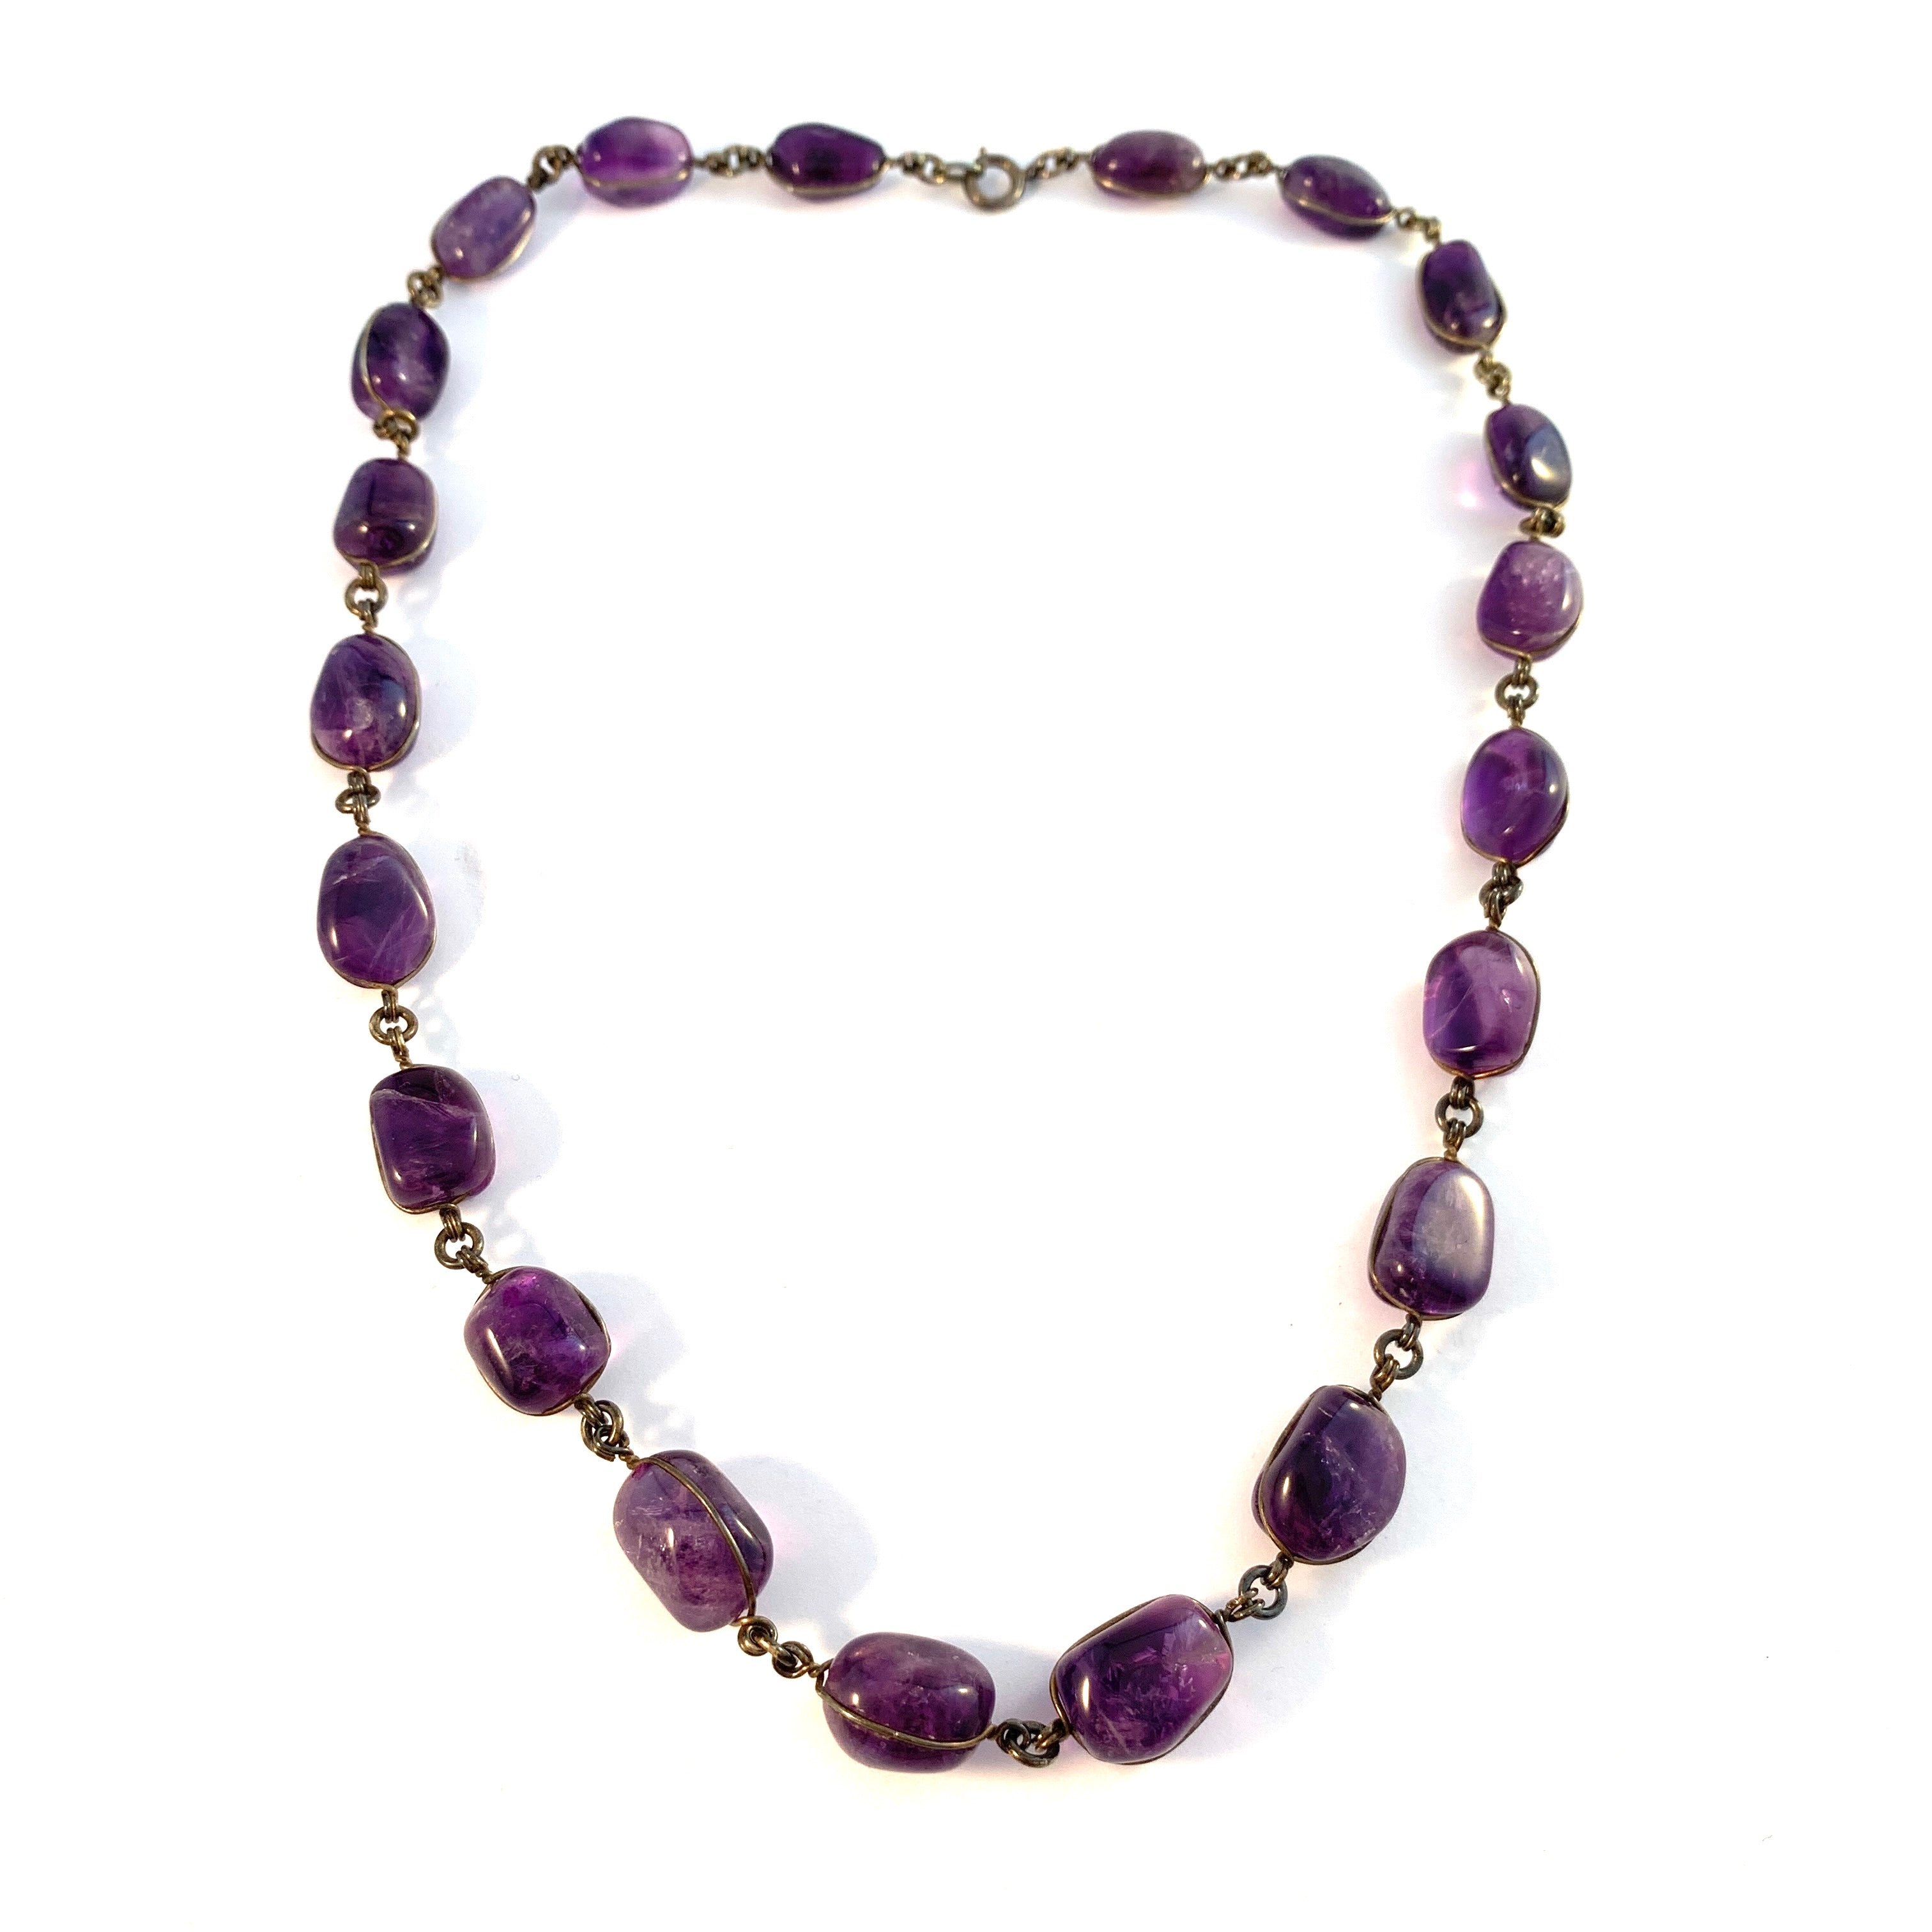 Antique c 1920s Solid 835 Silver Amethyst Riviere Necklace.